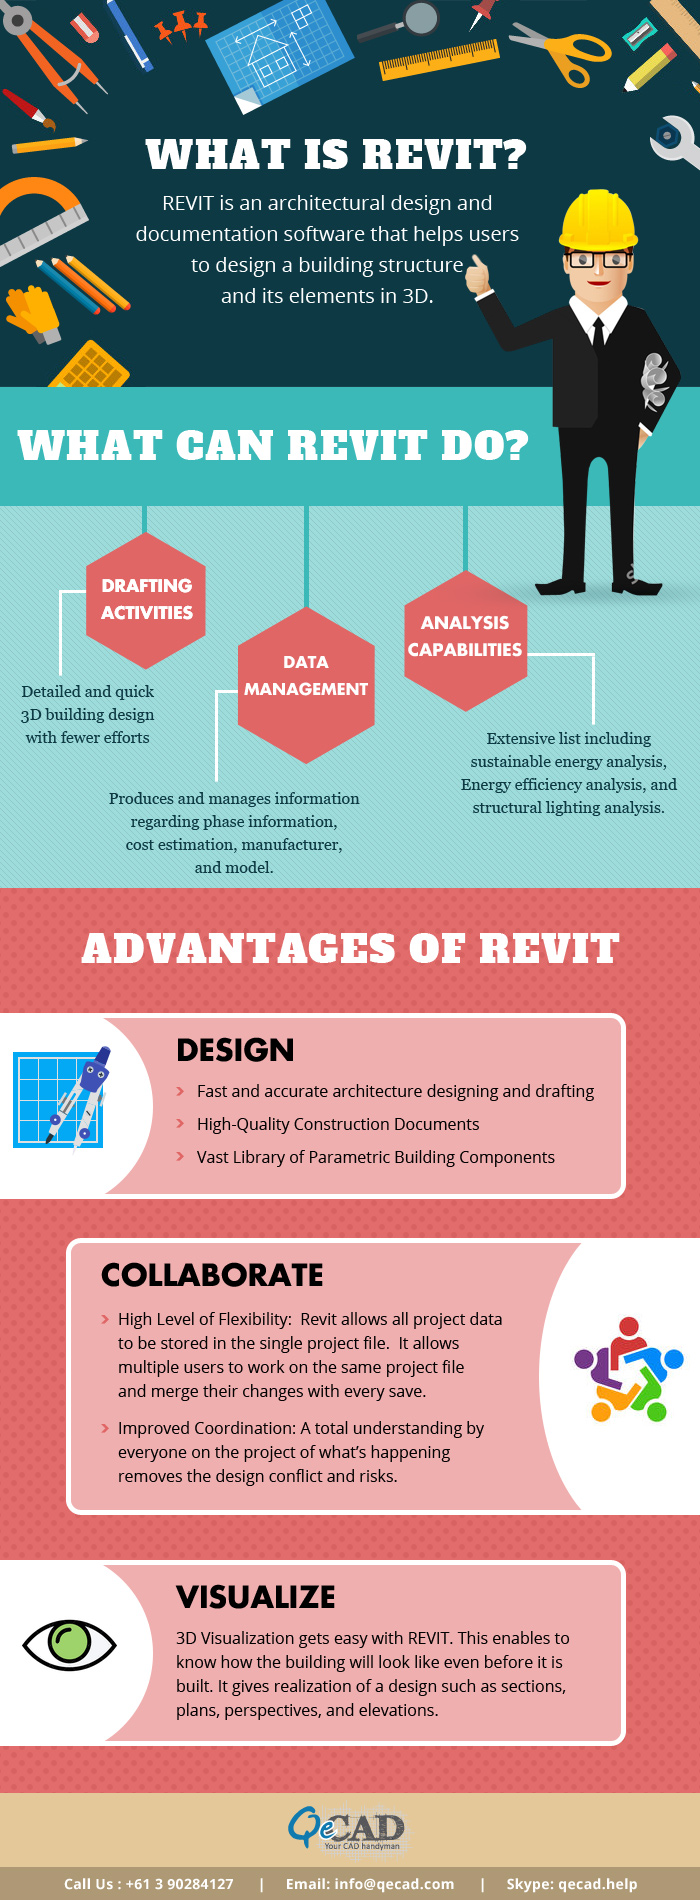 REVIT – Your Building solution from Concept to Construction